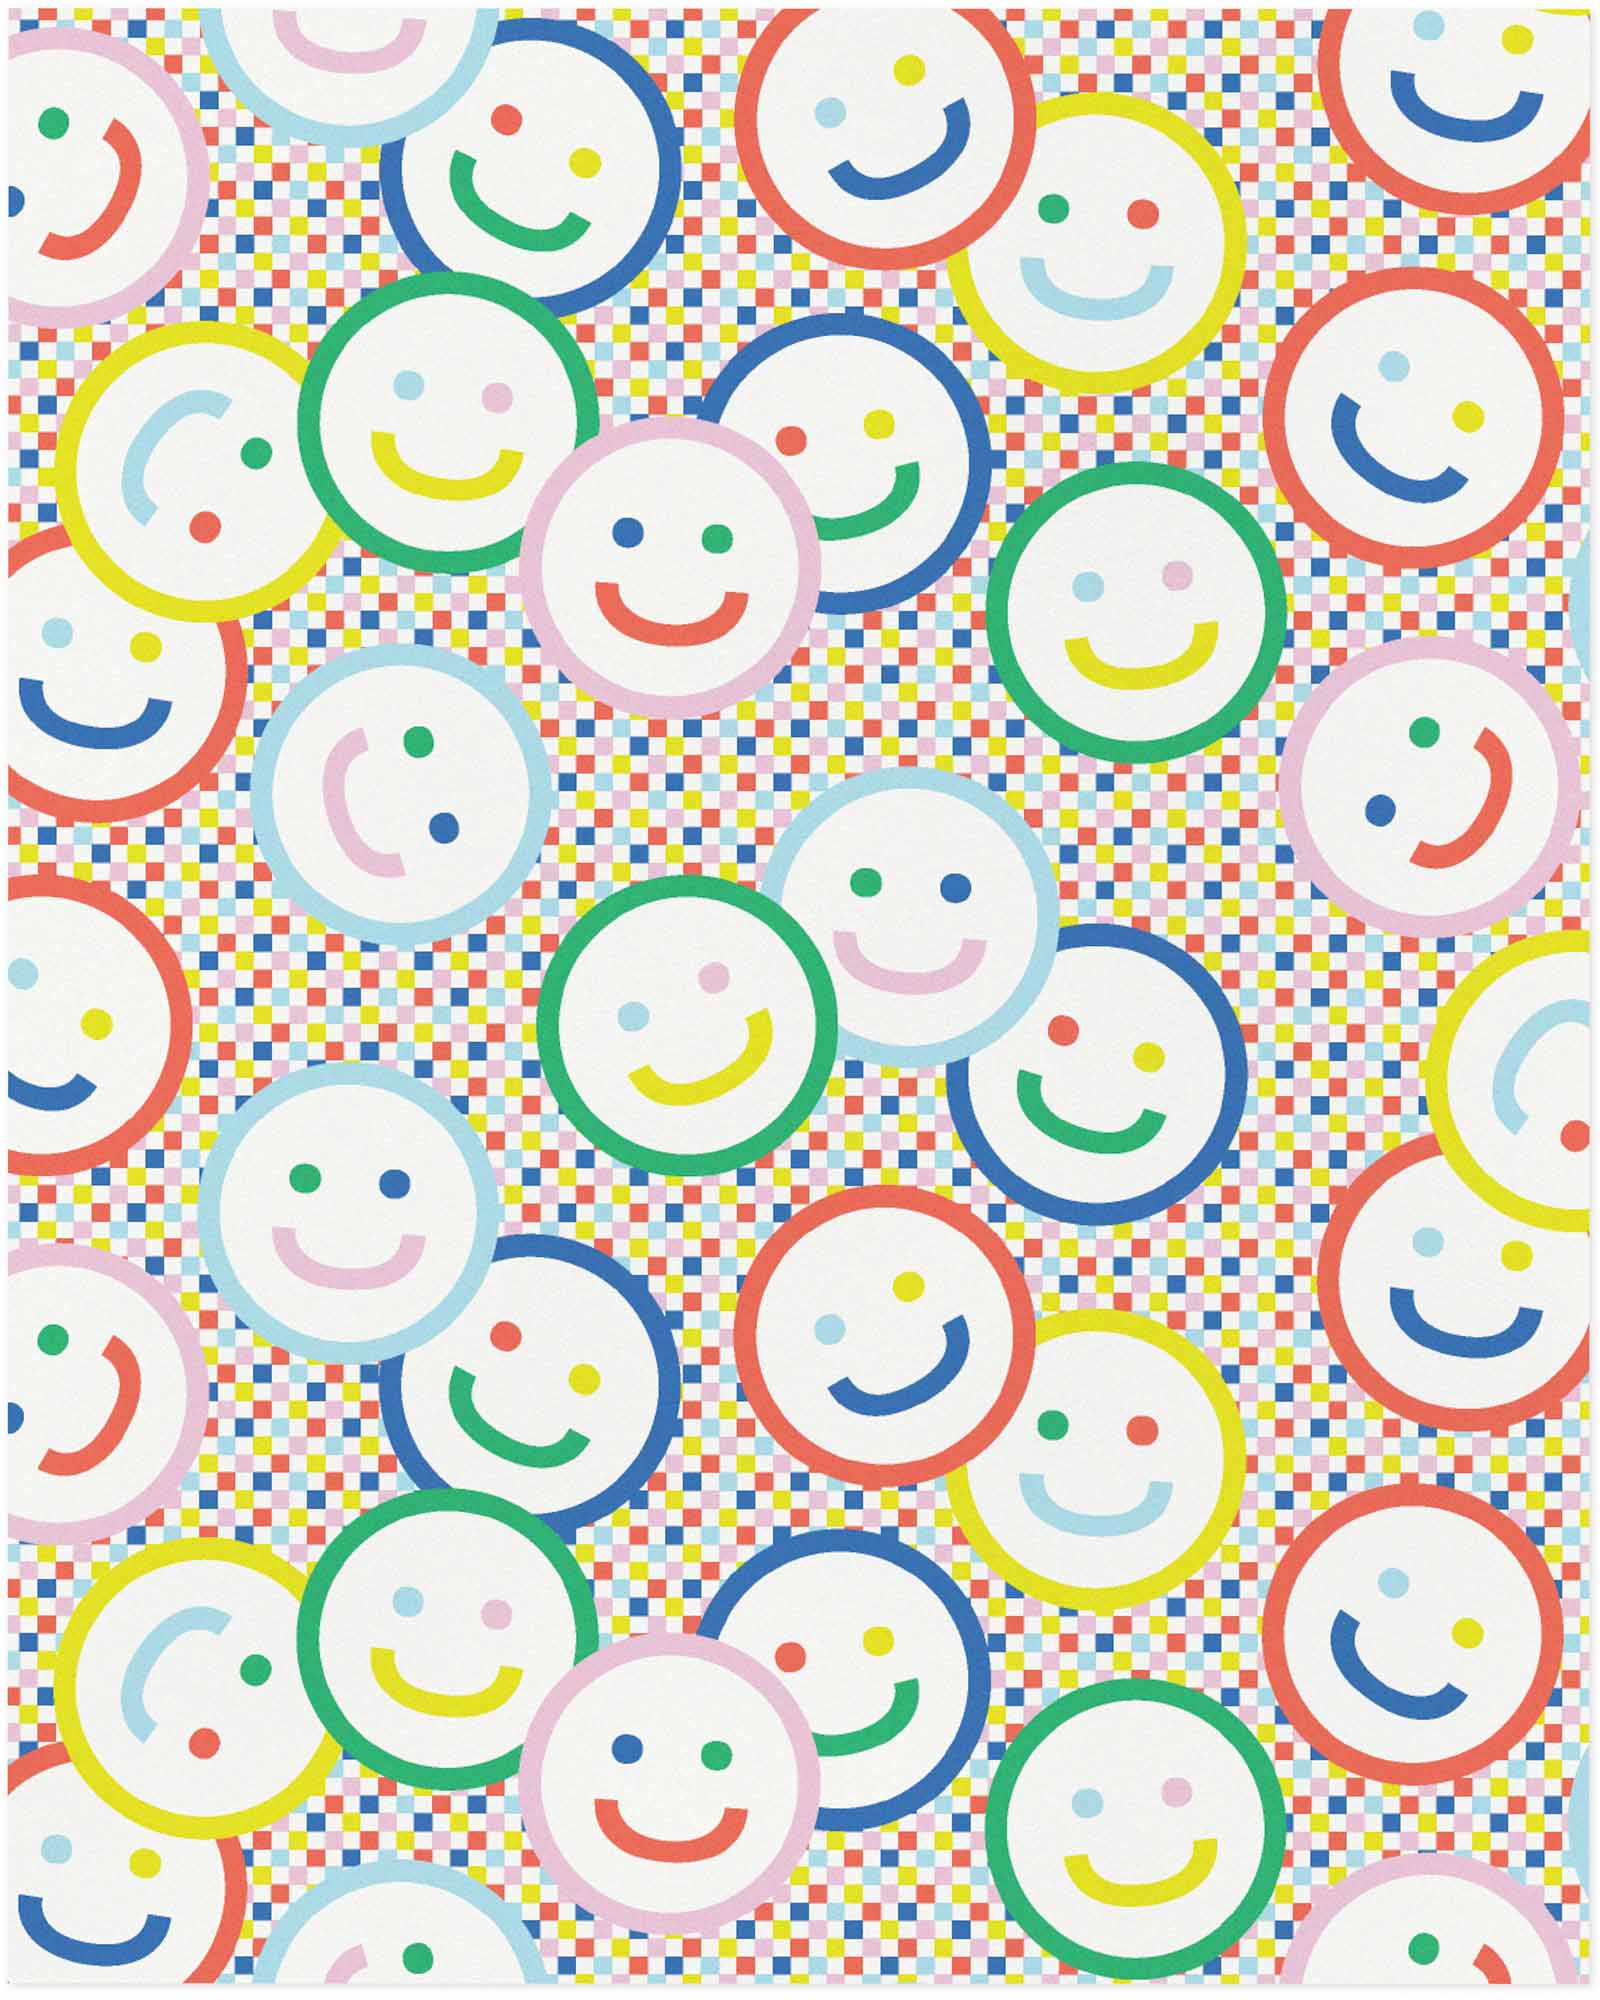 "Check Yr Smile" archival giclée art print with smiley face pattern against a rainbow checker background. Made in USA by My Darlin' @mydarlin_bk